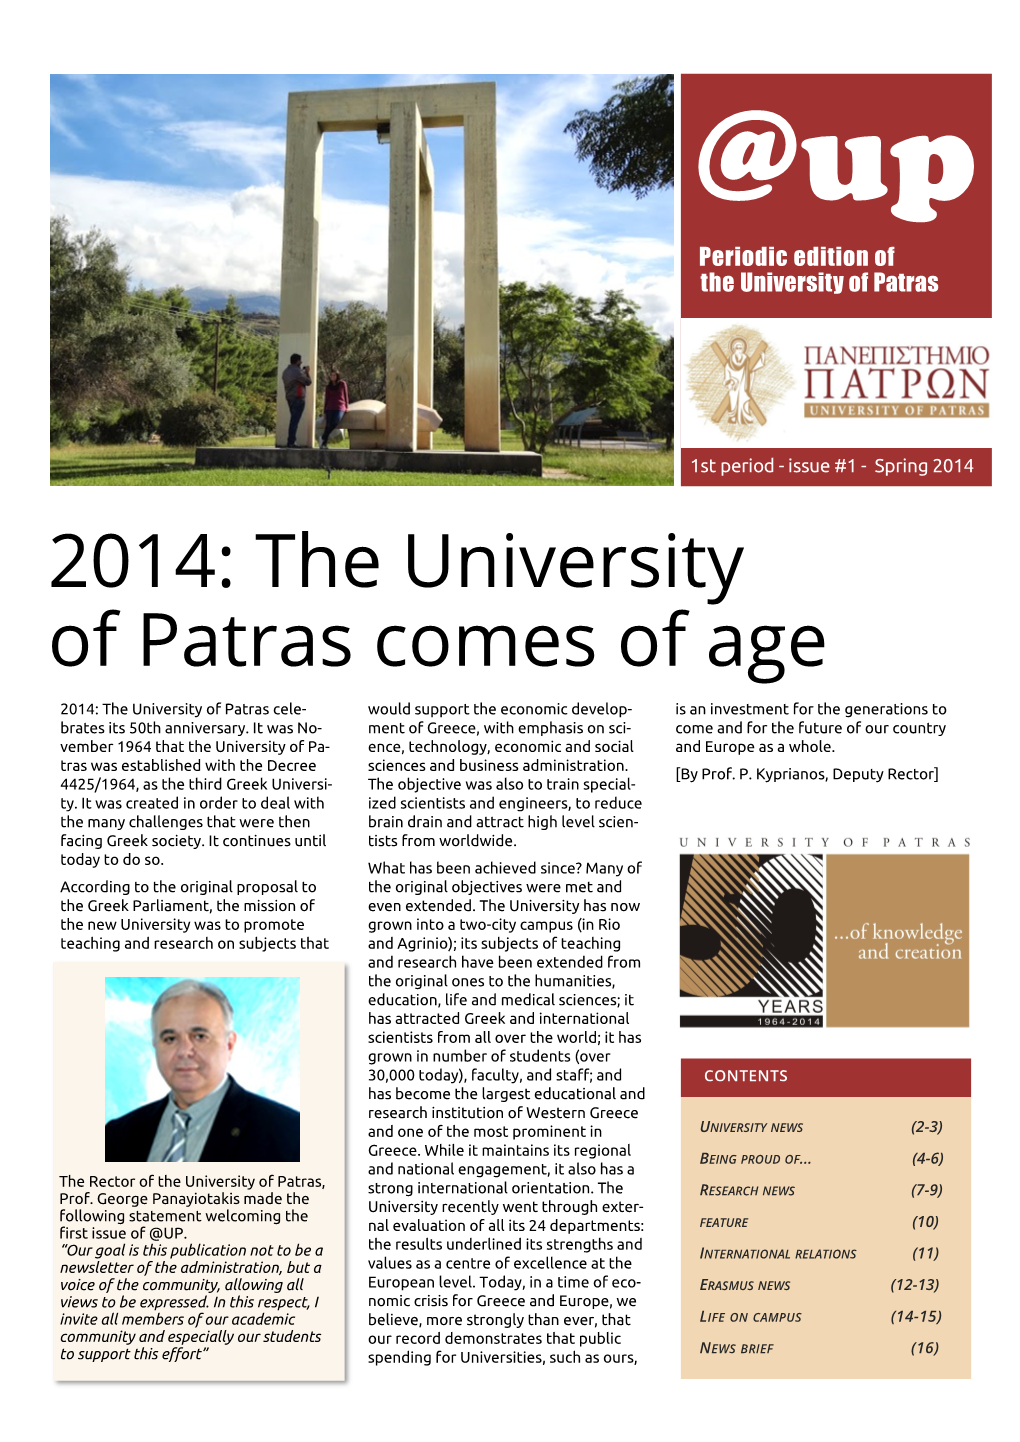 2014: the University of Patras Comes of Age